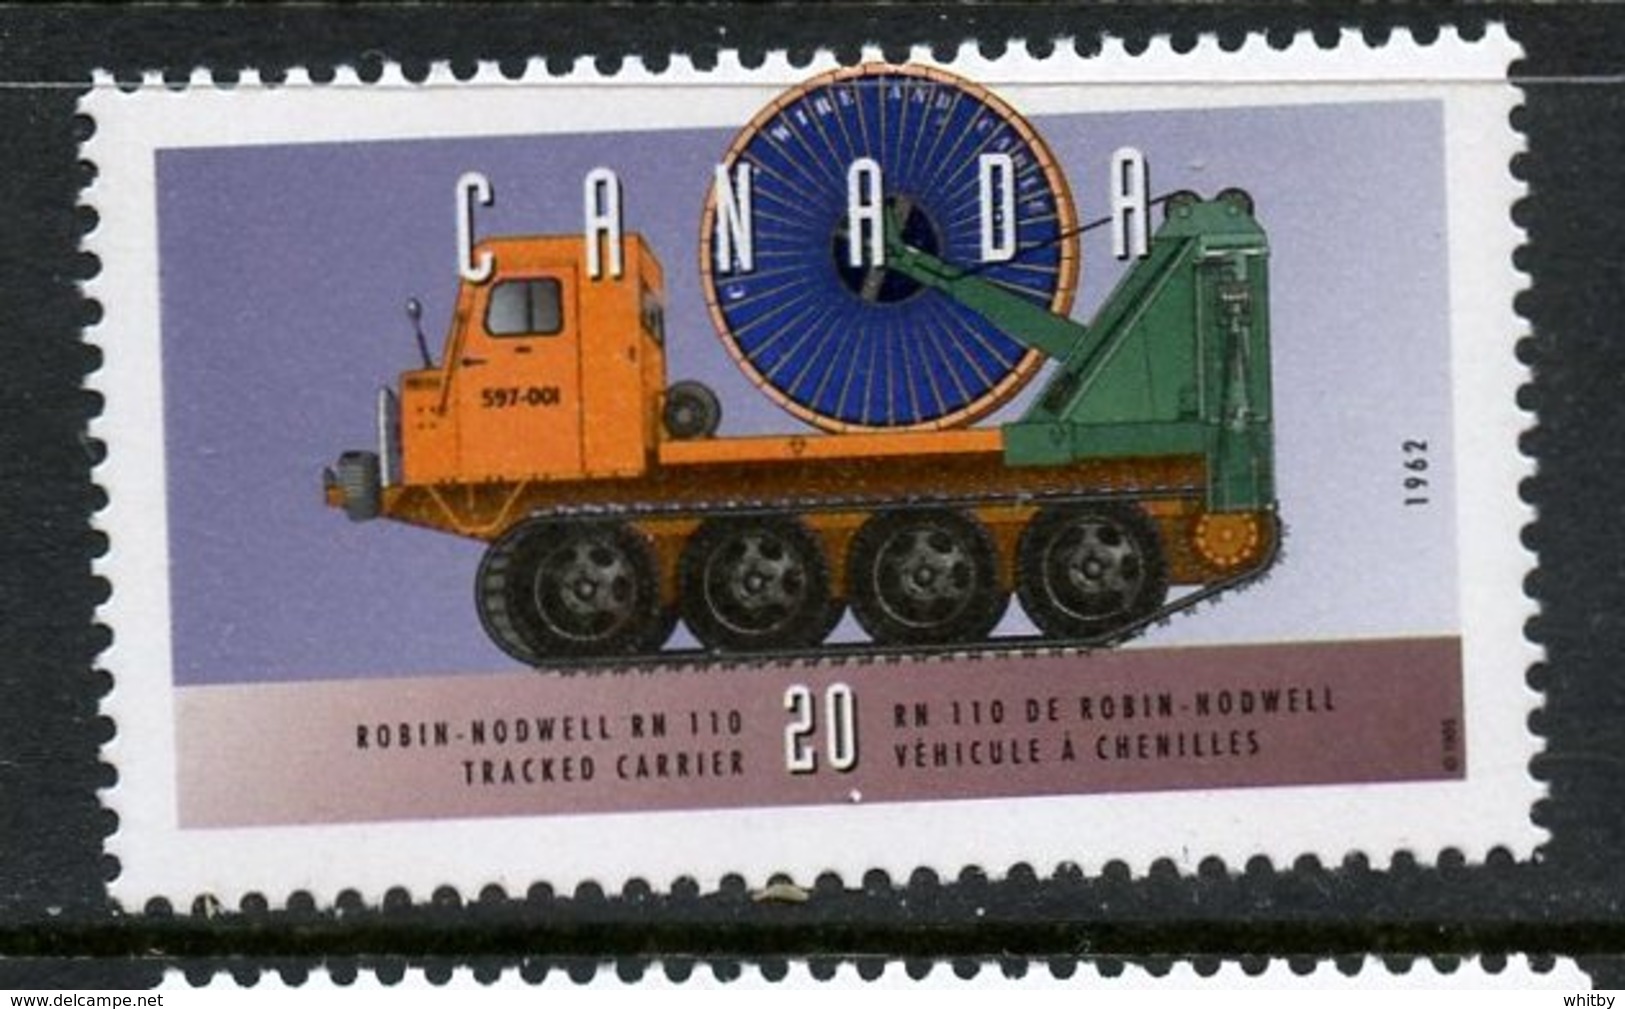 Canada 1996  20 Cent Robin Nodwell Carrier Issue  #1605w  MNH - Unused Stamps